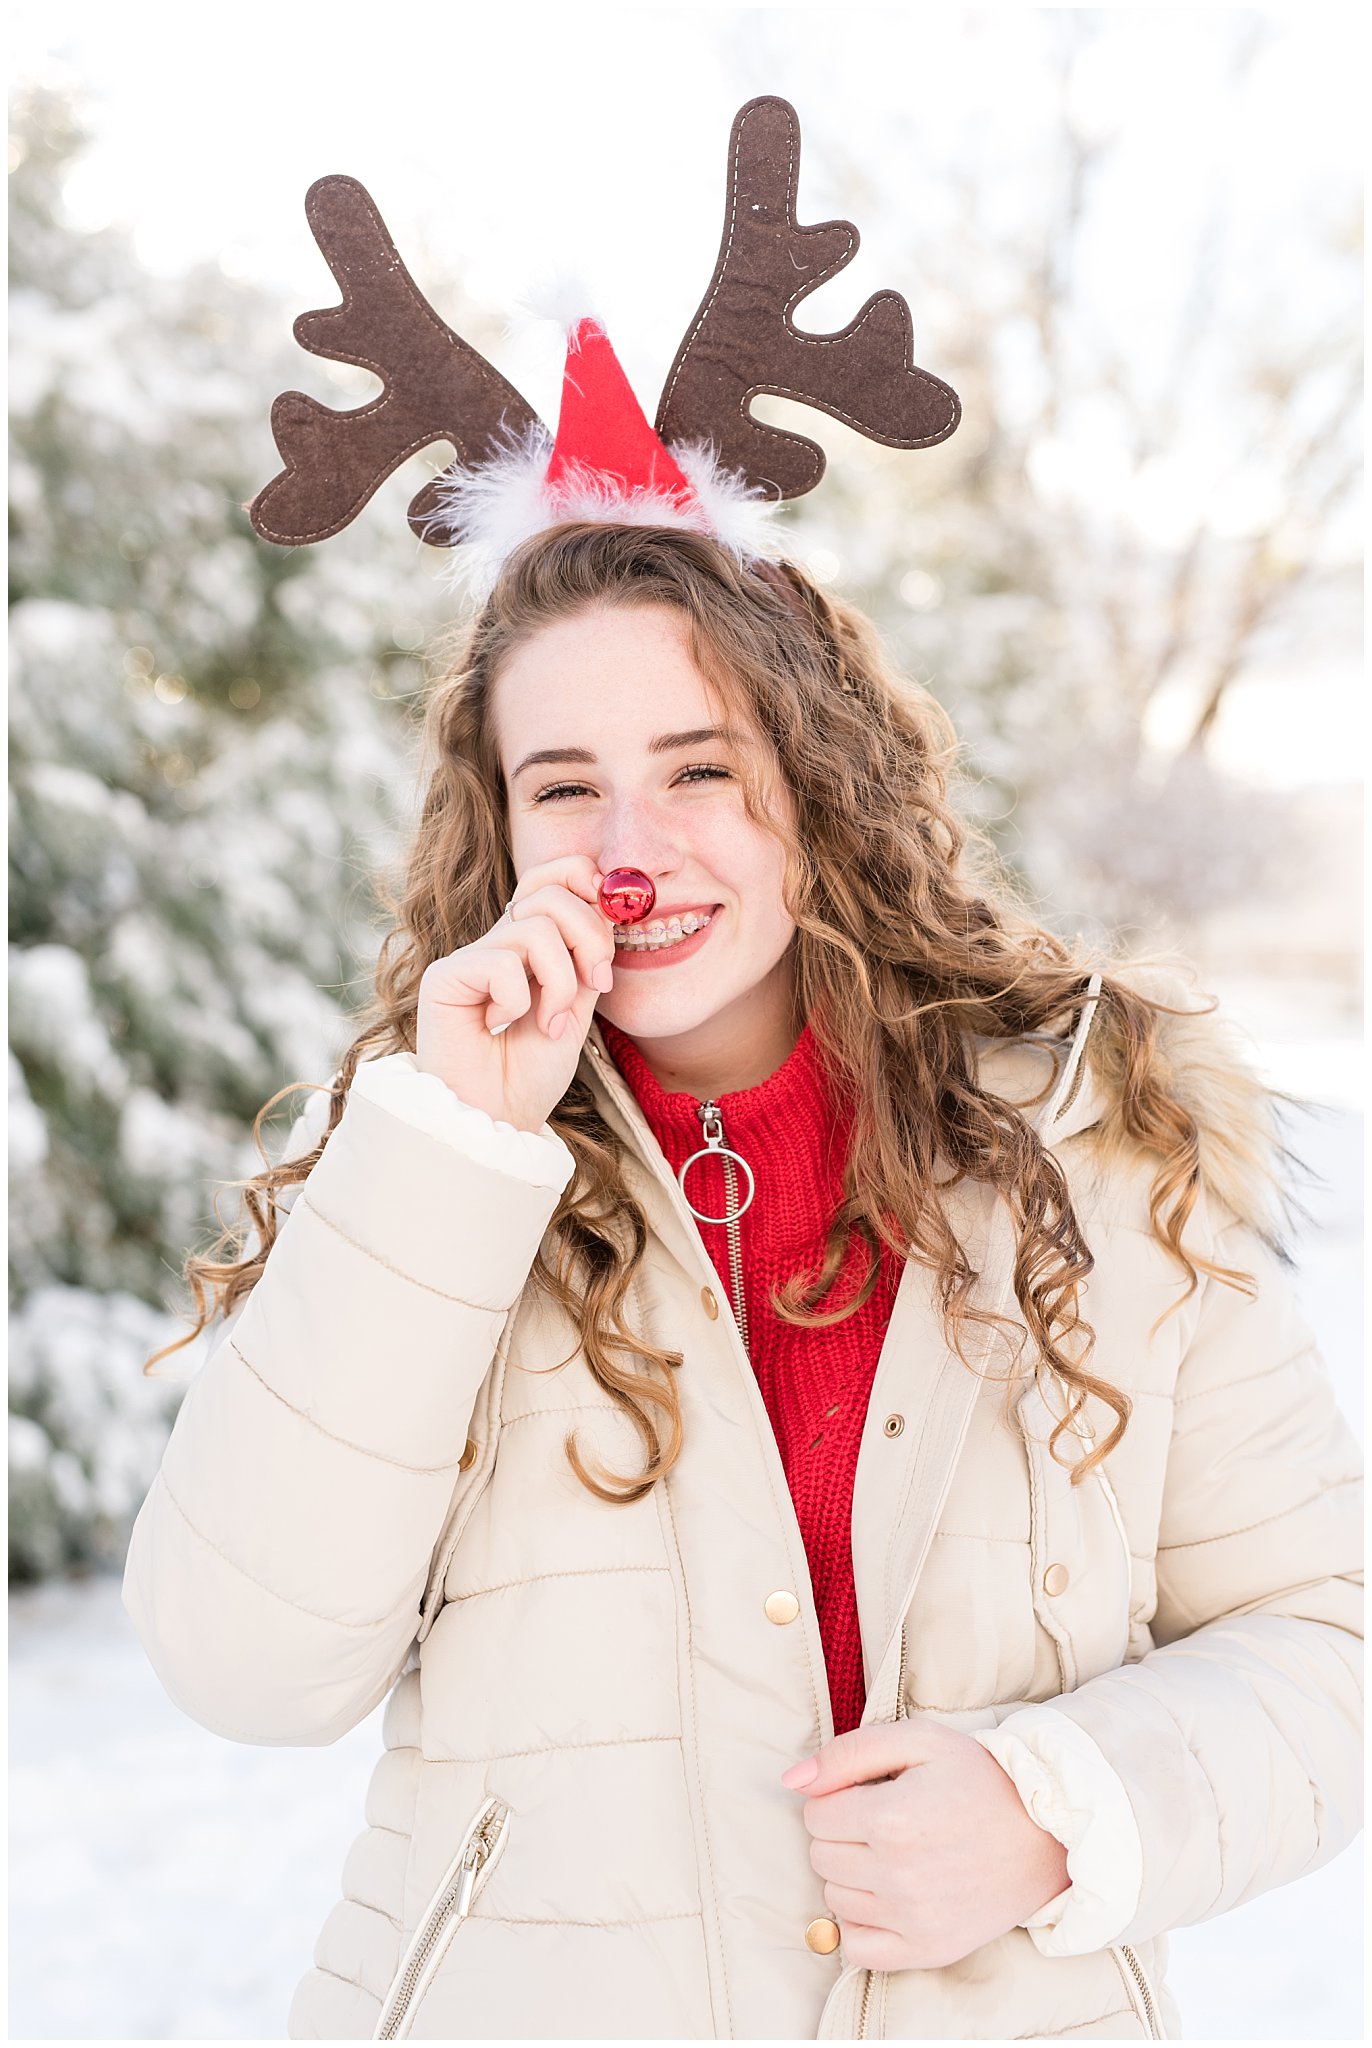 Teenage girl in rudolph nose and reindeer antlers in front of Christmas trees | Utah Family Christmas Photoshoot | Oak Hills Reception and Event | Jessie and Dallin Photography